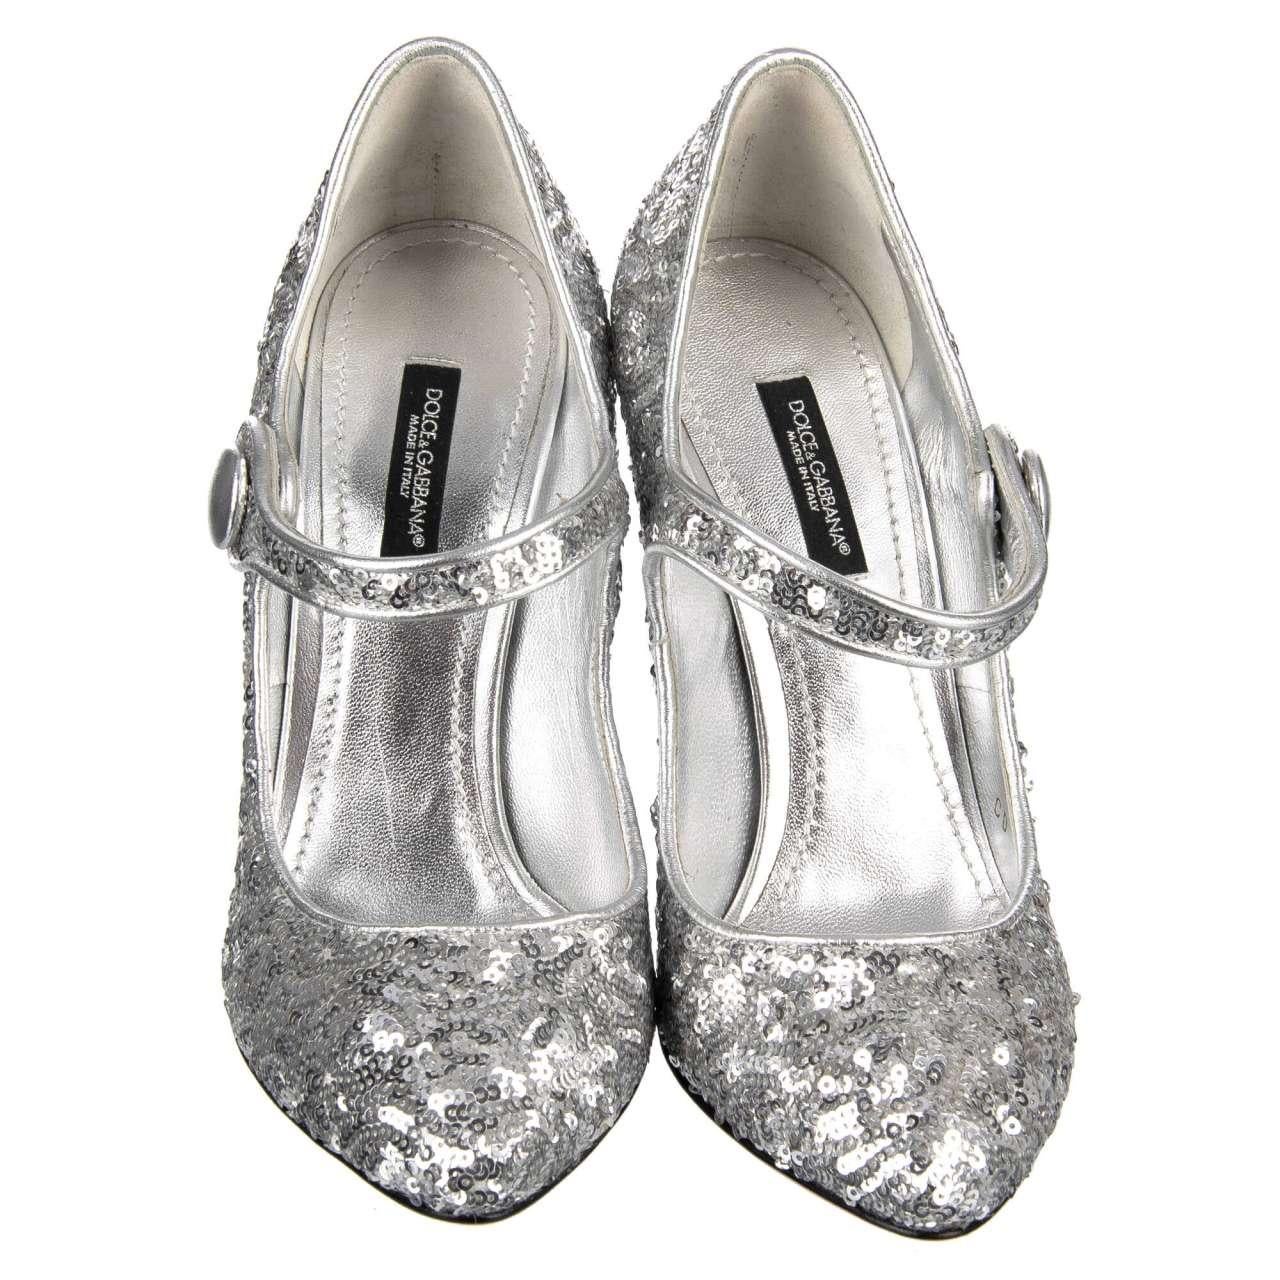 Dolce & Gabbana - Sequined Mary Janes VALLY Silver EUR 36 In Excellent Condition For Sale In Erkrath, DE